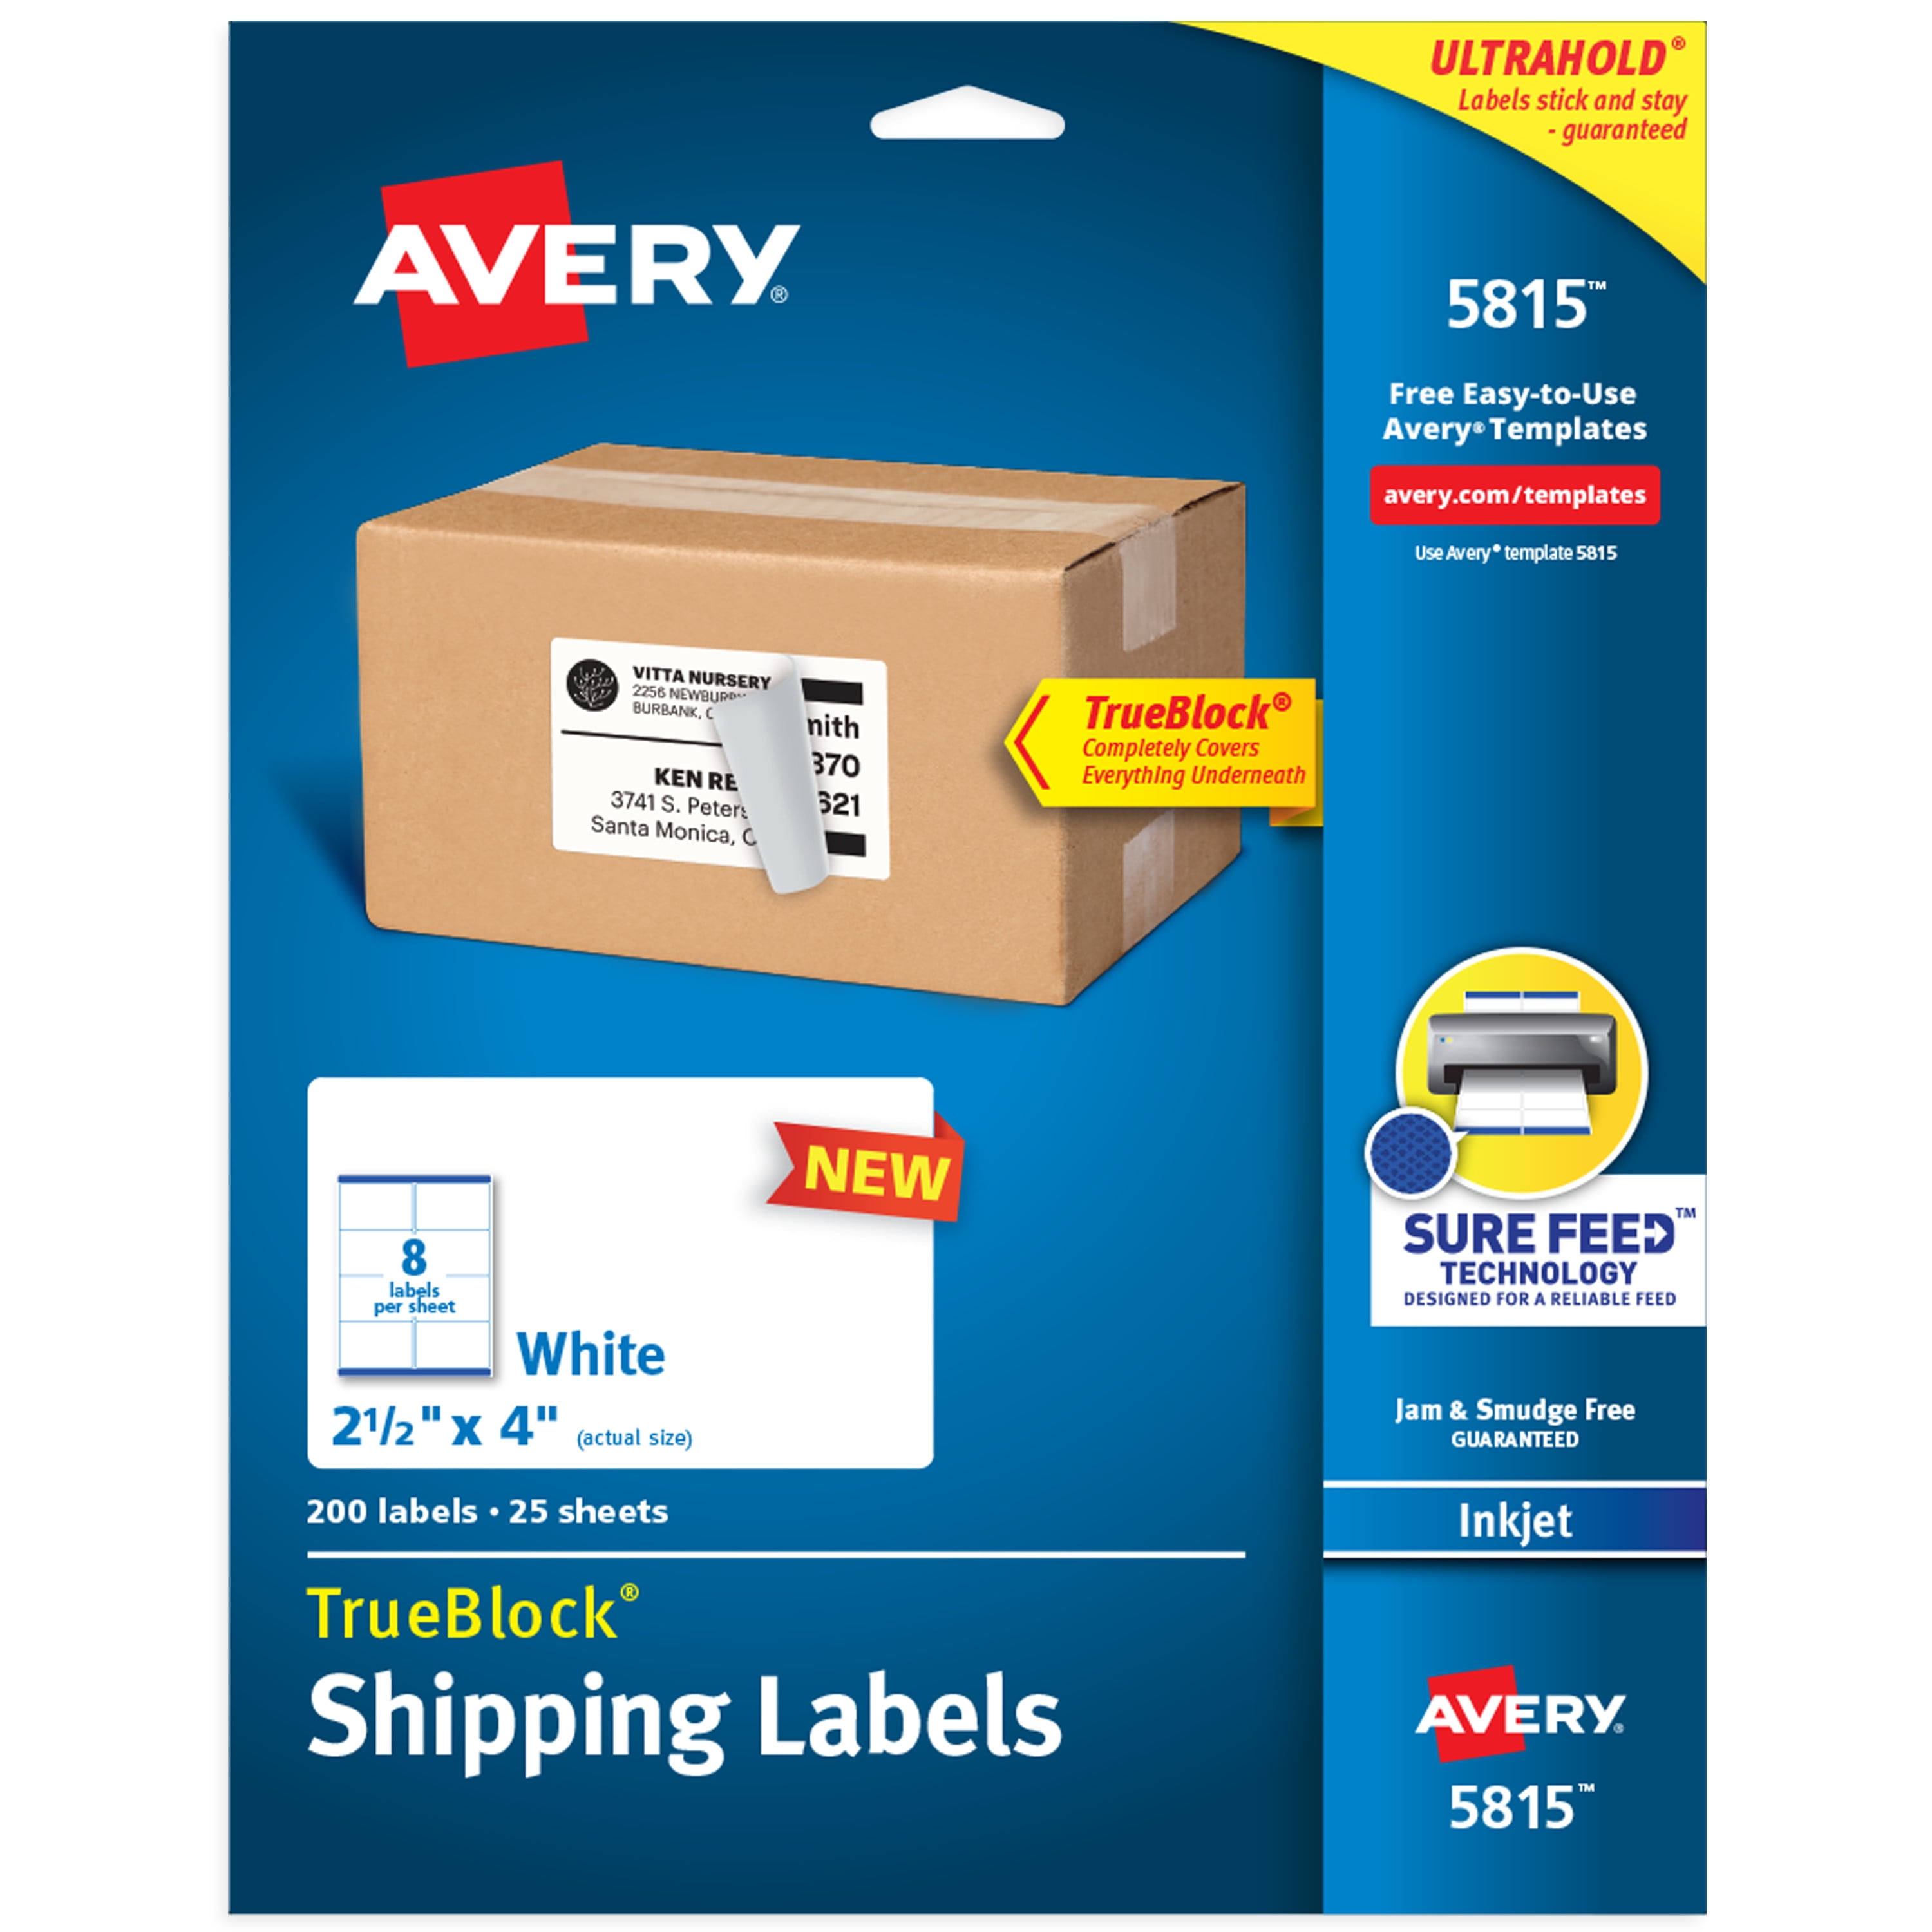 avery-printable-blank-shipping-labels-2-5-x-4-white-200-labels